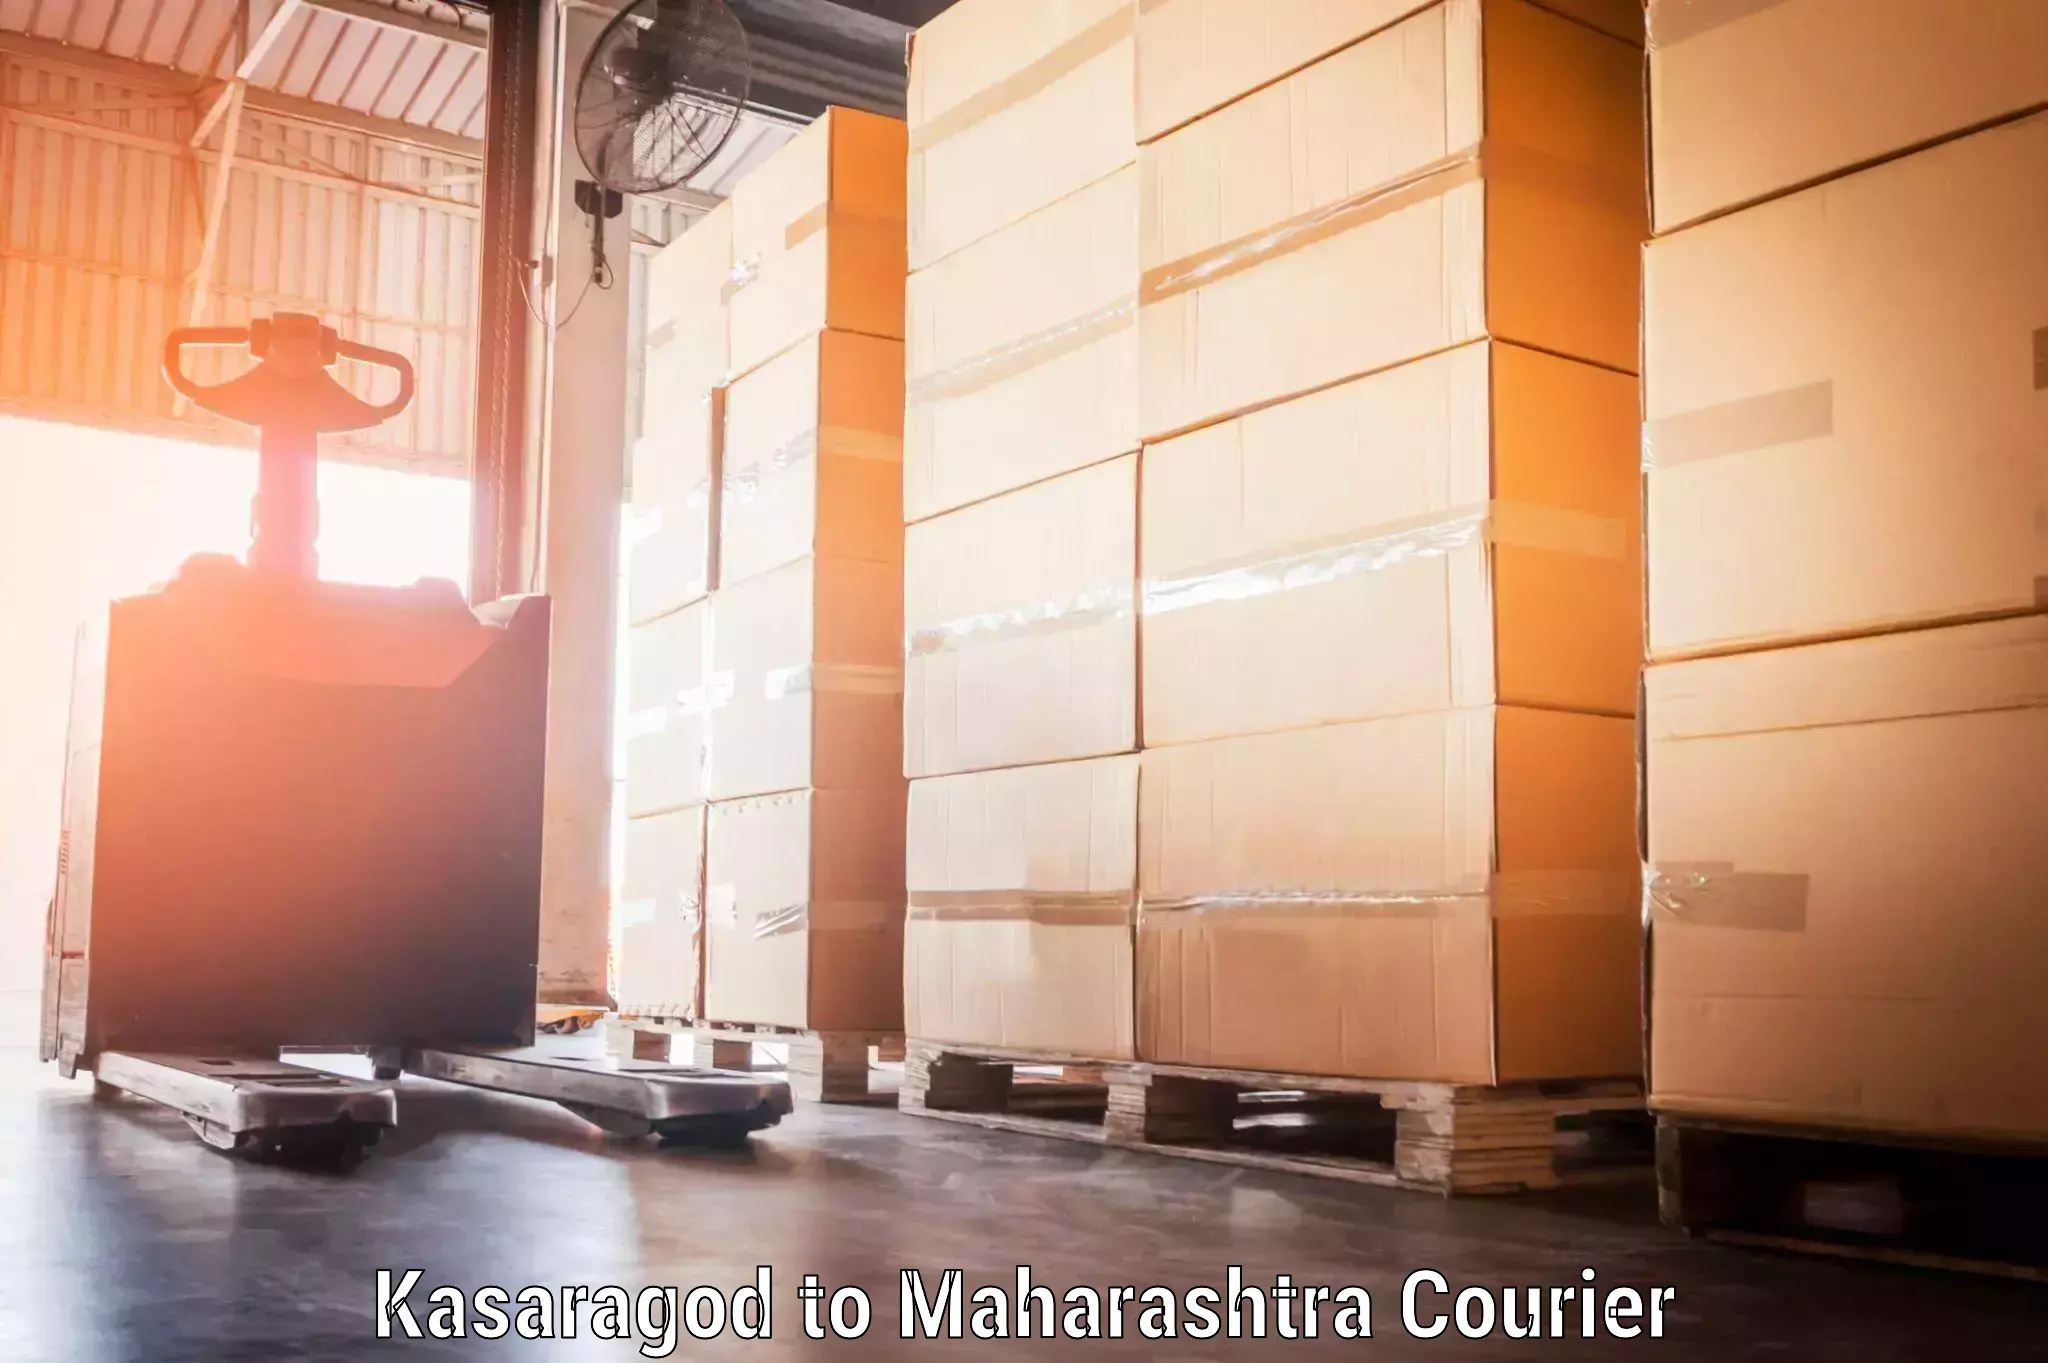 Baggage shipping schedule Kasaragod to Solapur